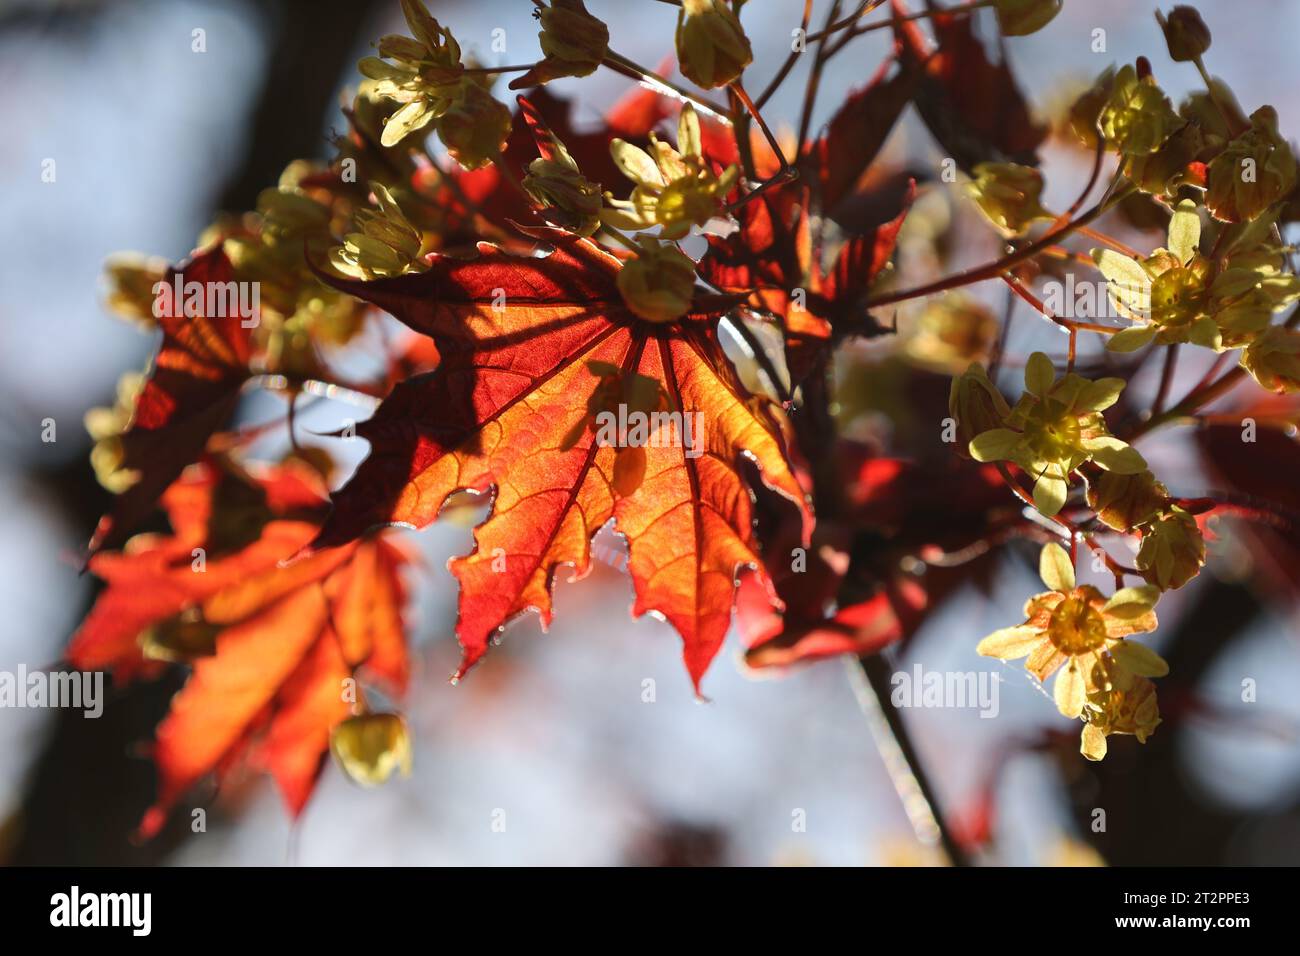 Branch of a tree with yellow flowers and green leaves in autumn Stock Photo